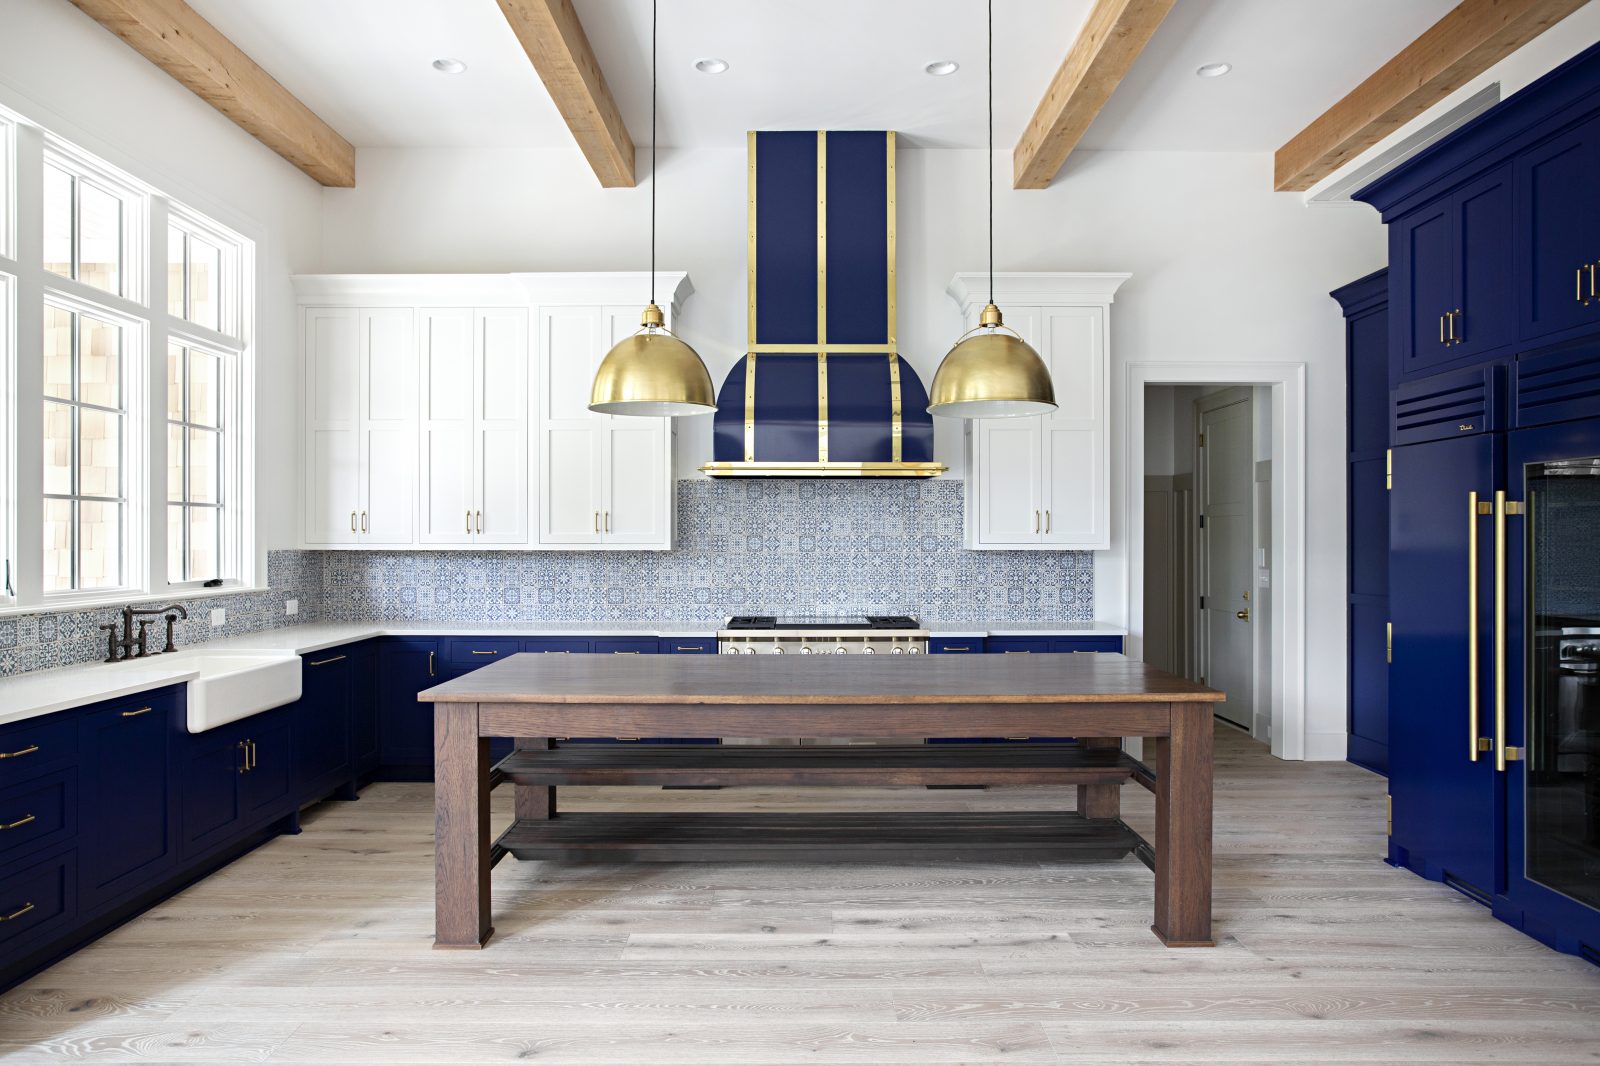 blue and white kitchen after remodel. Inspiration from Textures Nashville